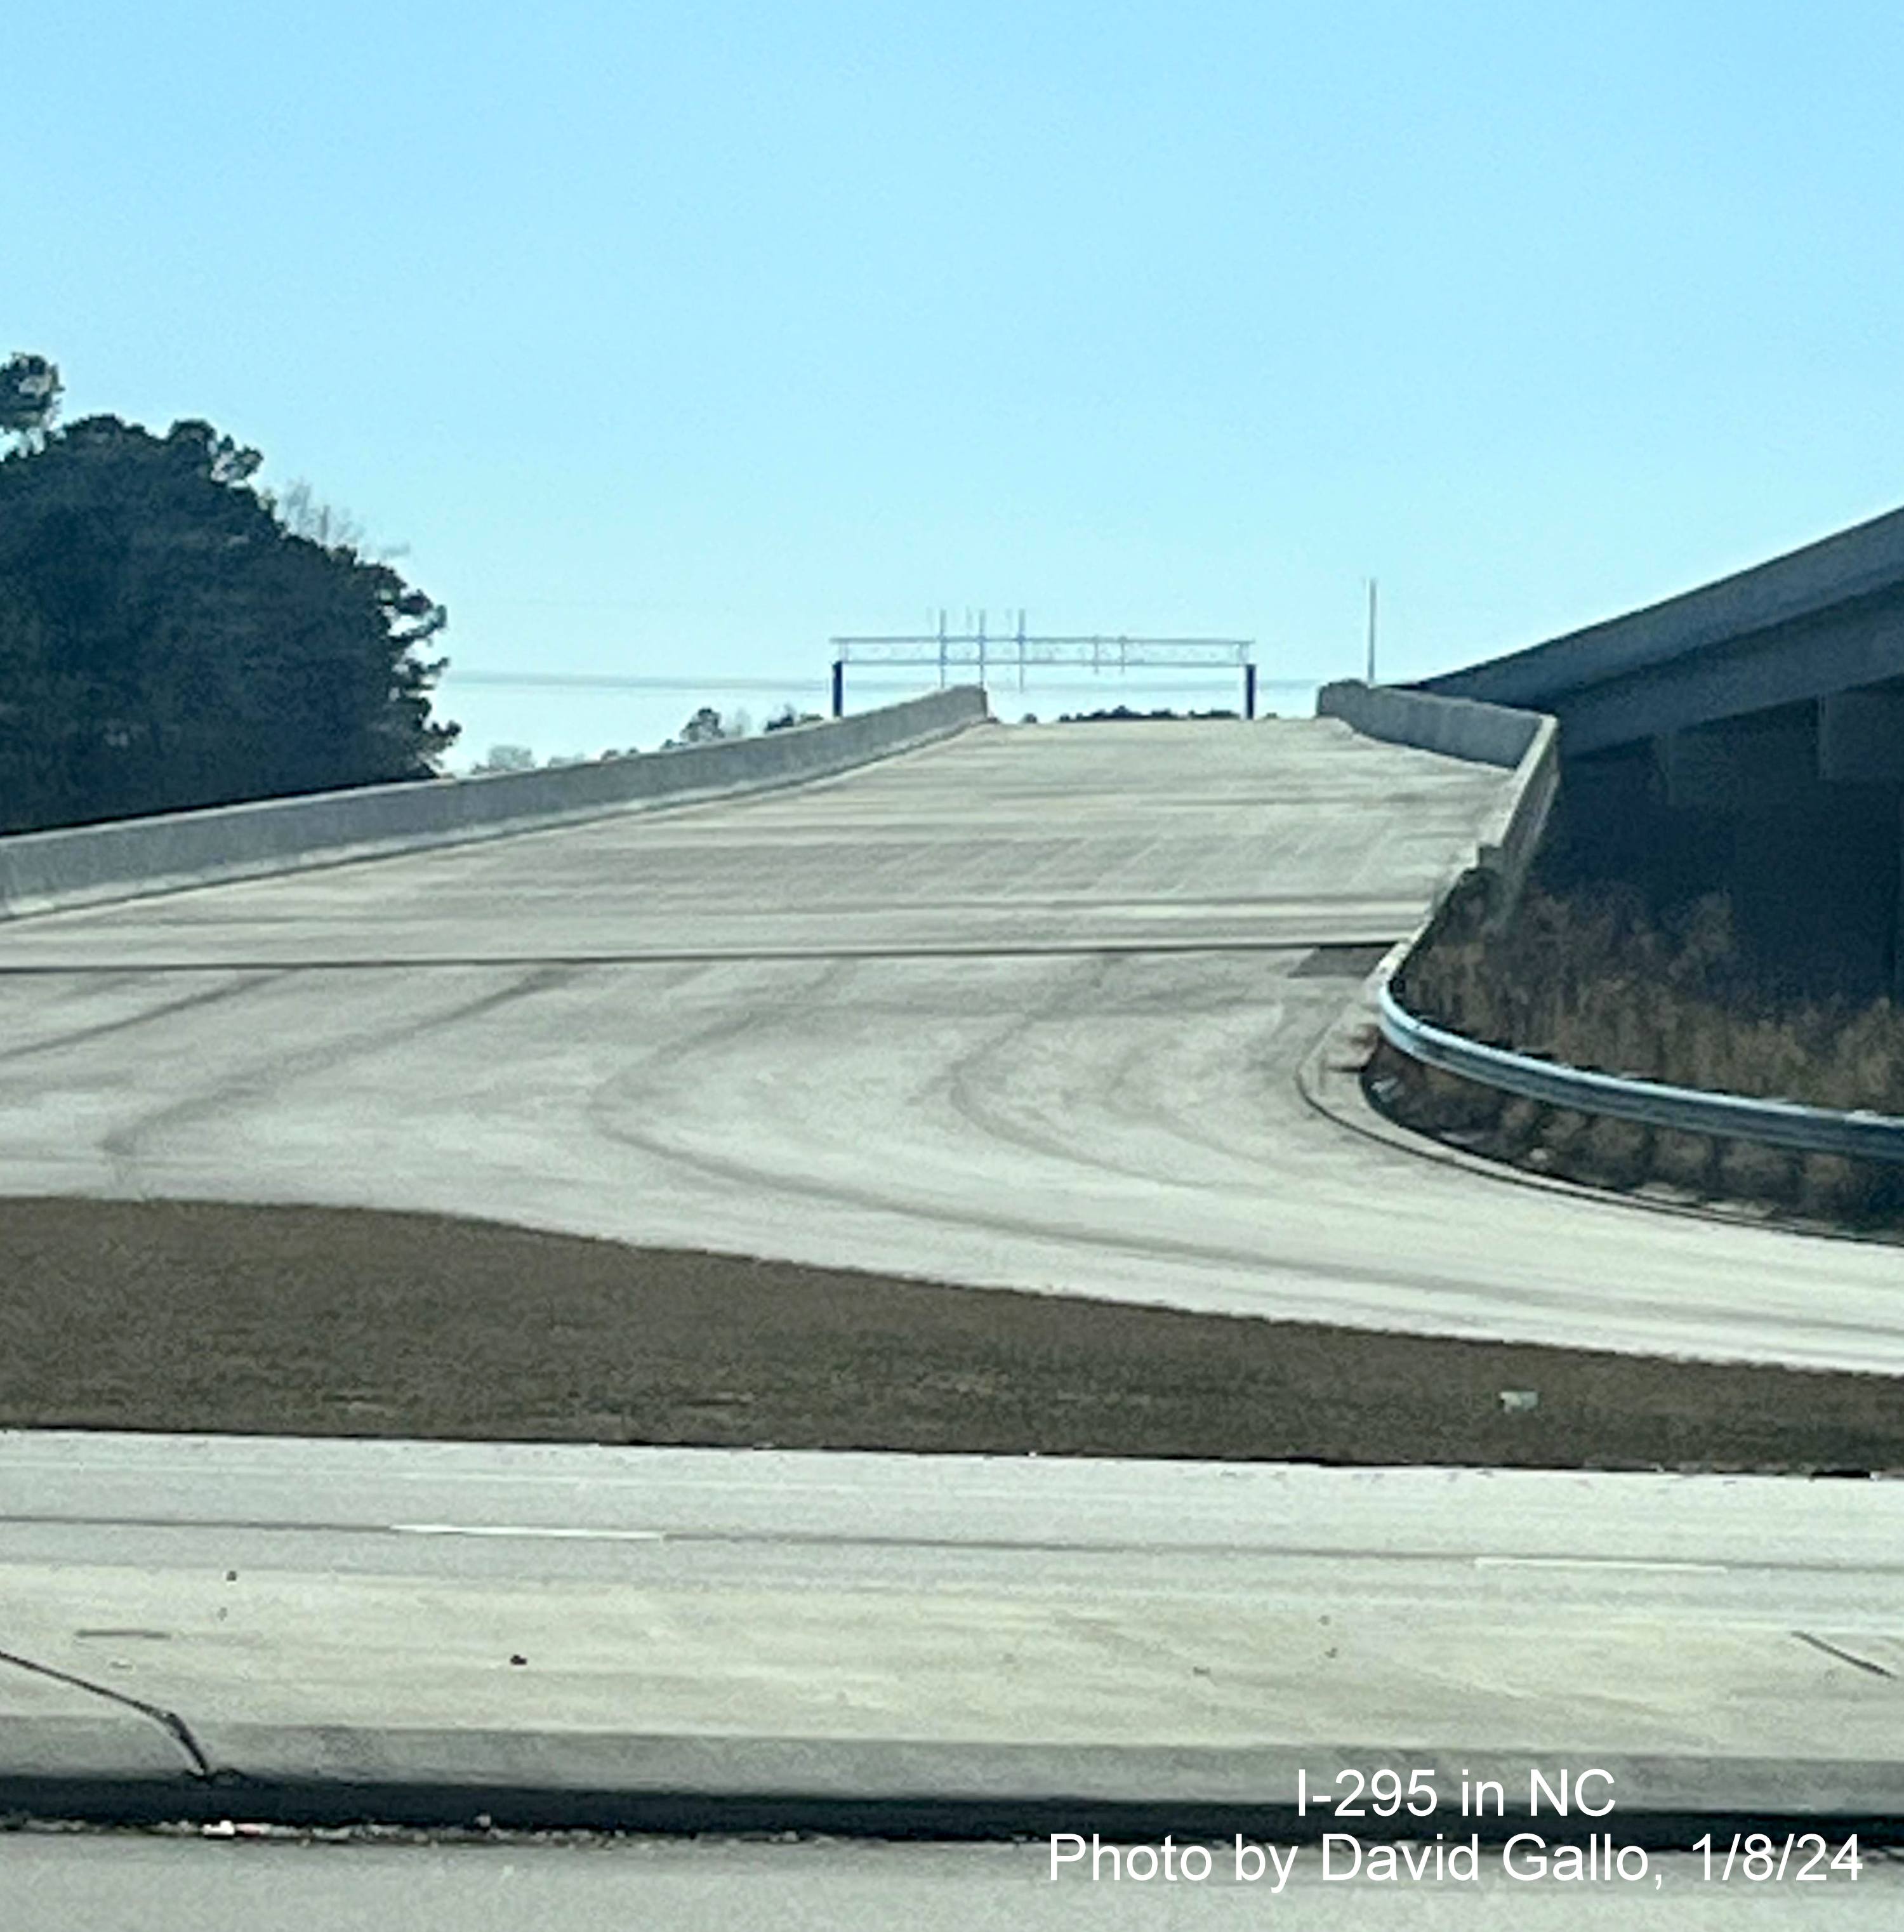 Image of completed I-295 North ramp for US 401 exit in Fayetteville, by David Gallo, January 2024